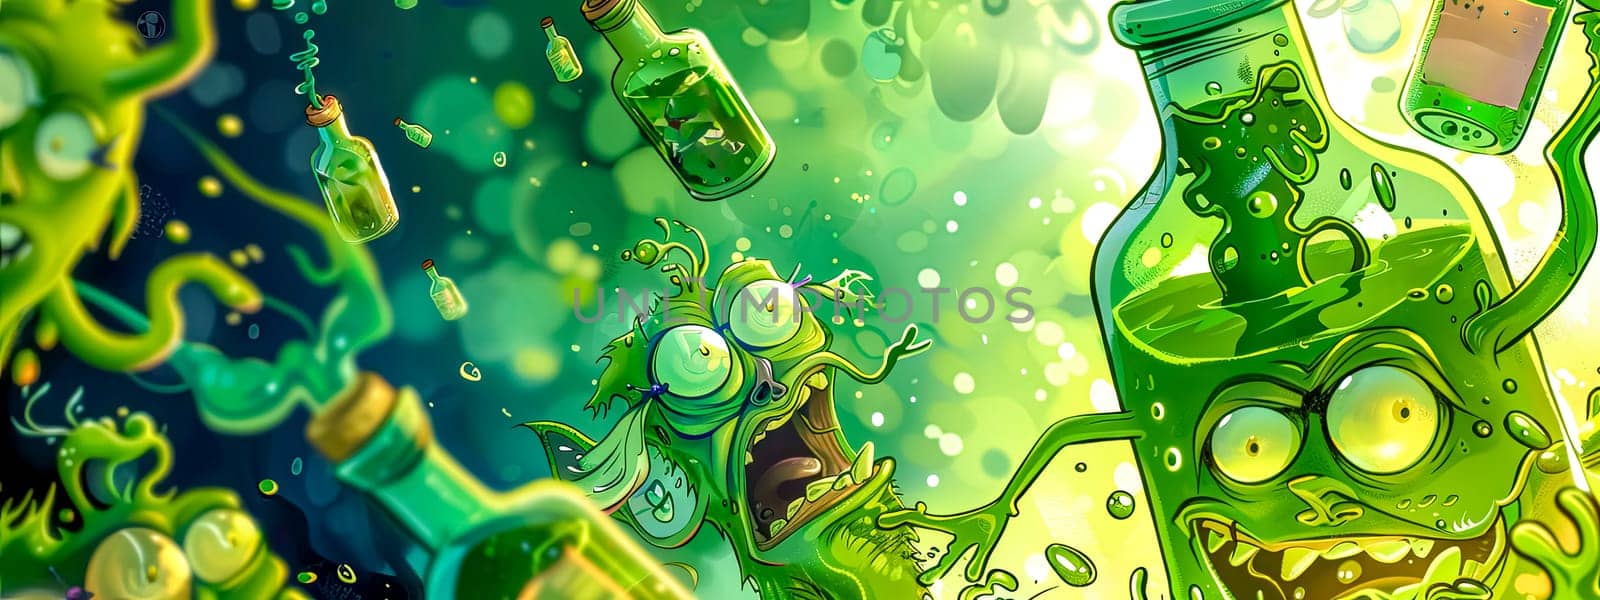 Cartoon lab monsters in a whimsical science experiment by Edophoto